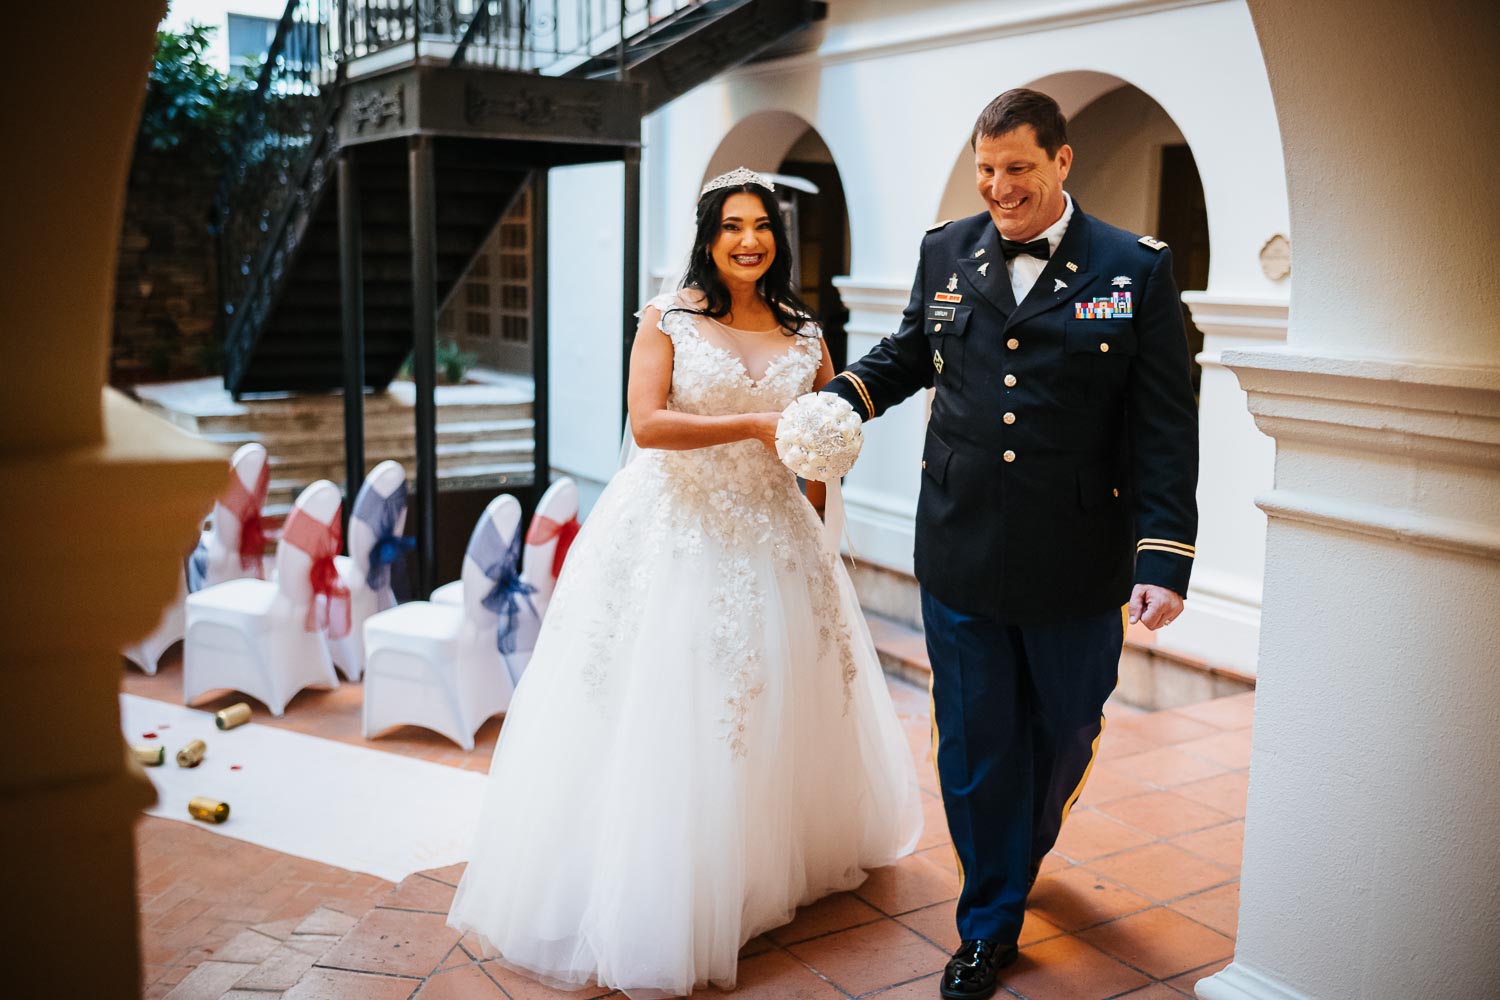 The newly minted wedding couple slip away from the courtyard at Omni La Mansion Riverwalk hotel in San Antonio Texas